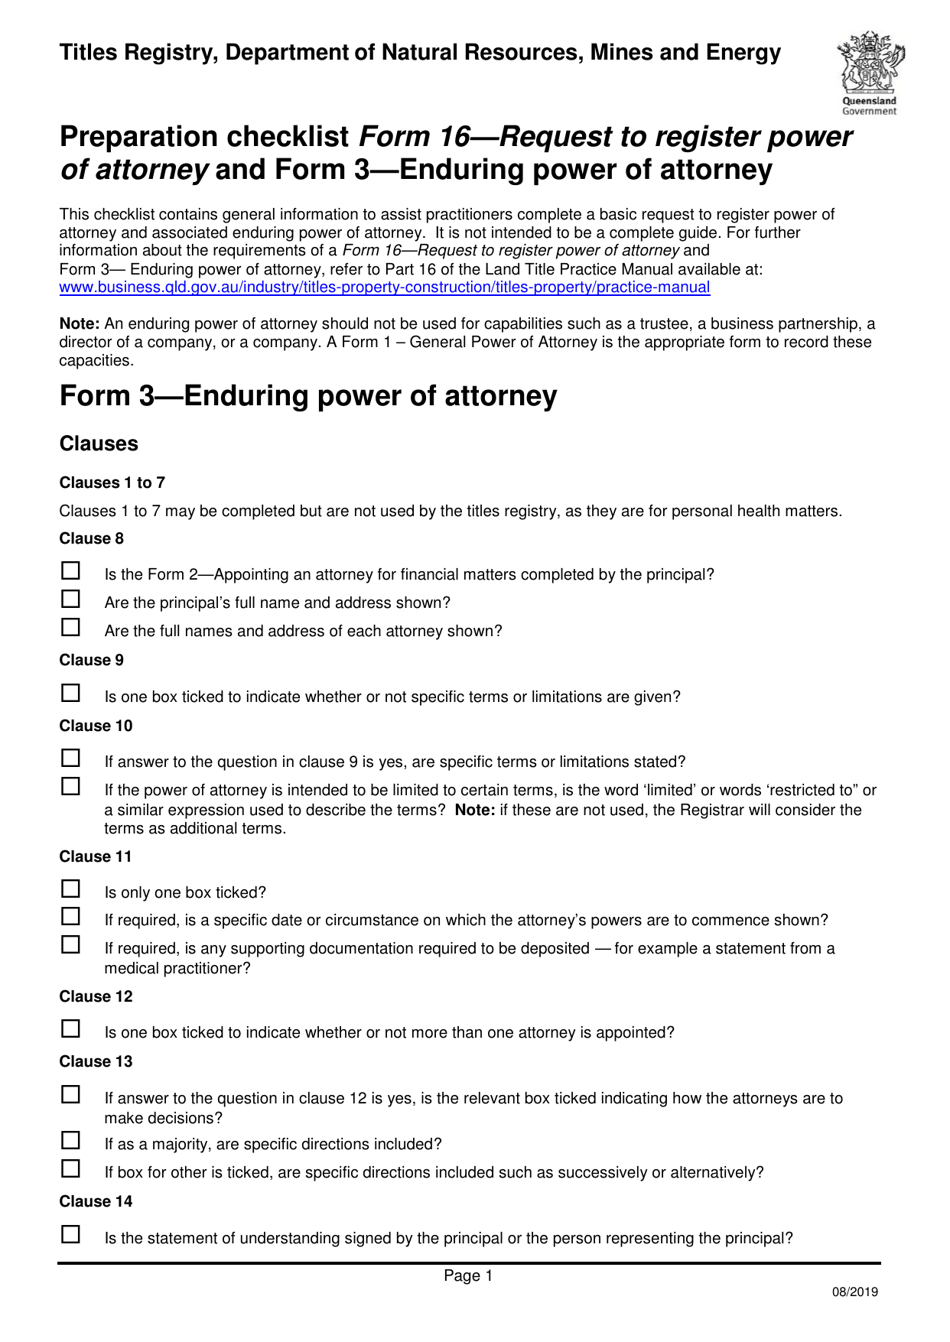 Form 16 (3) Preparation Checklist - Request to Register Power of Attorney and Enduring Power of Attorney - Queensland, Australia, Page 1